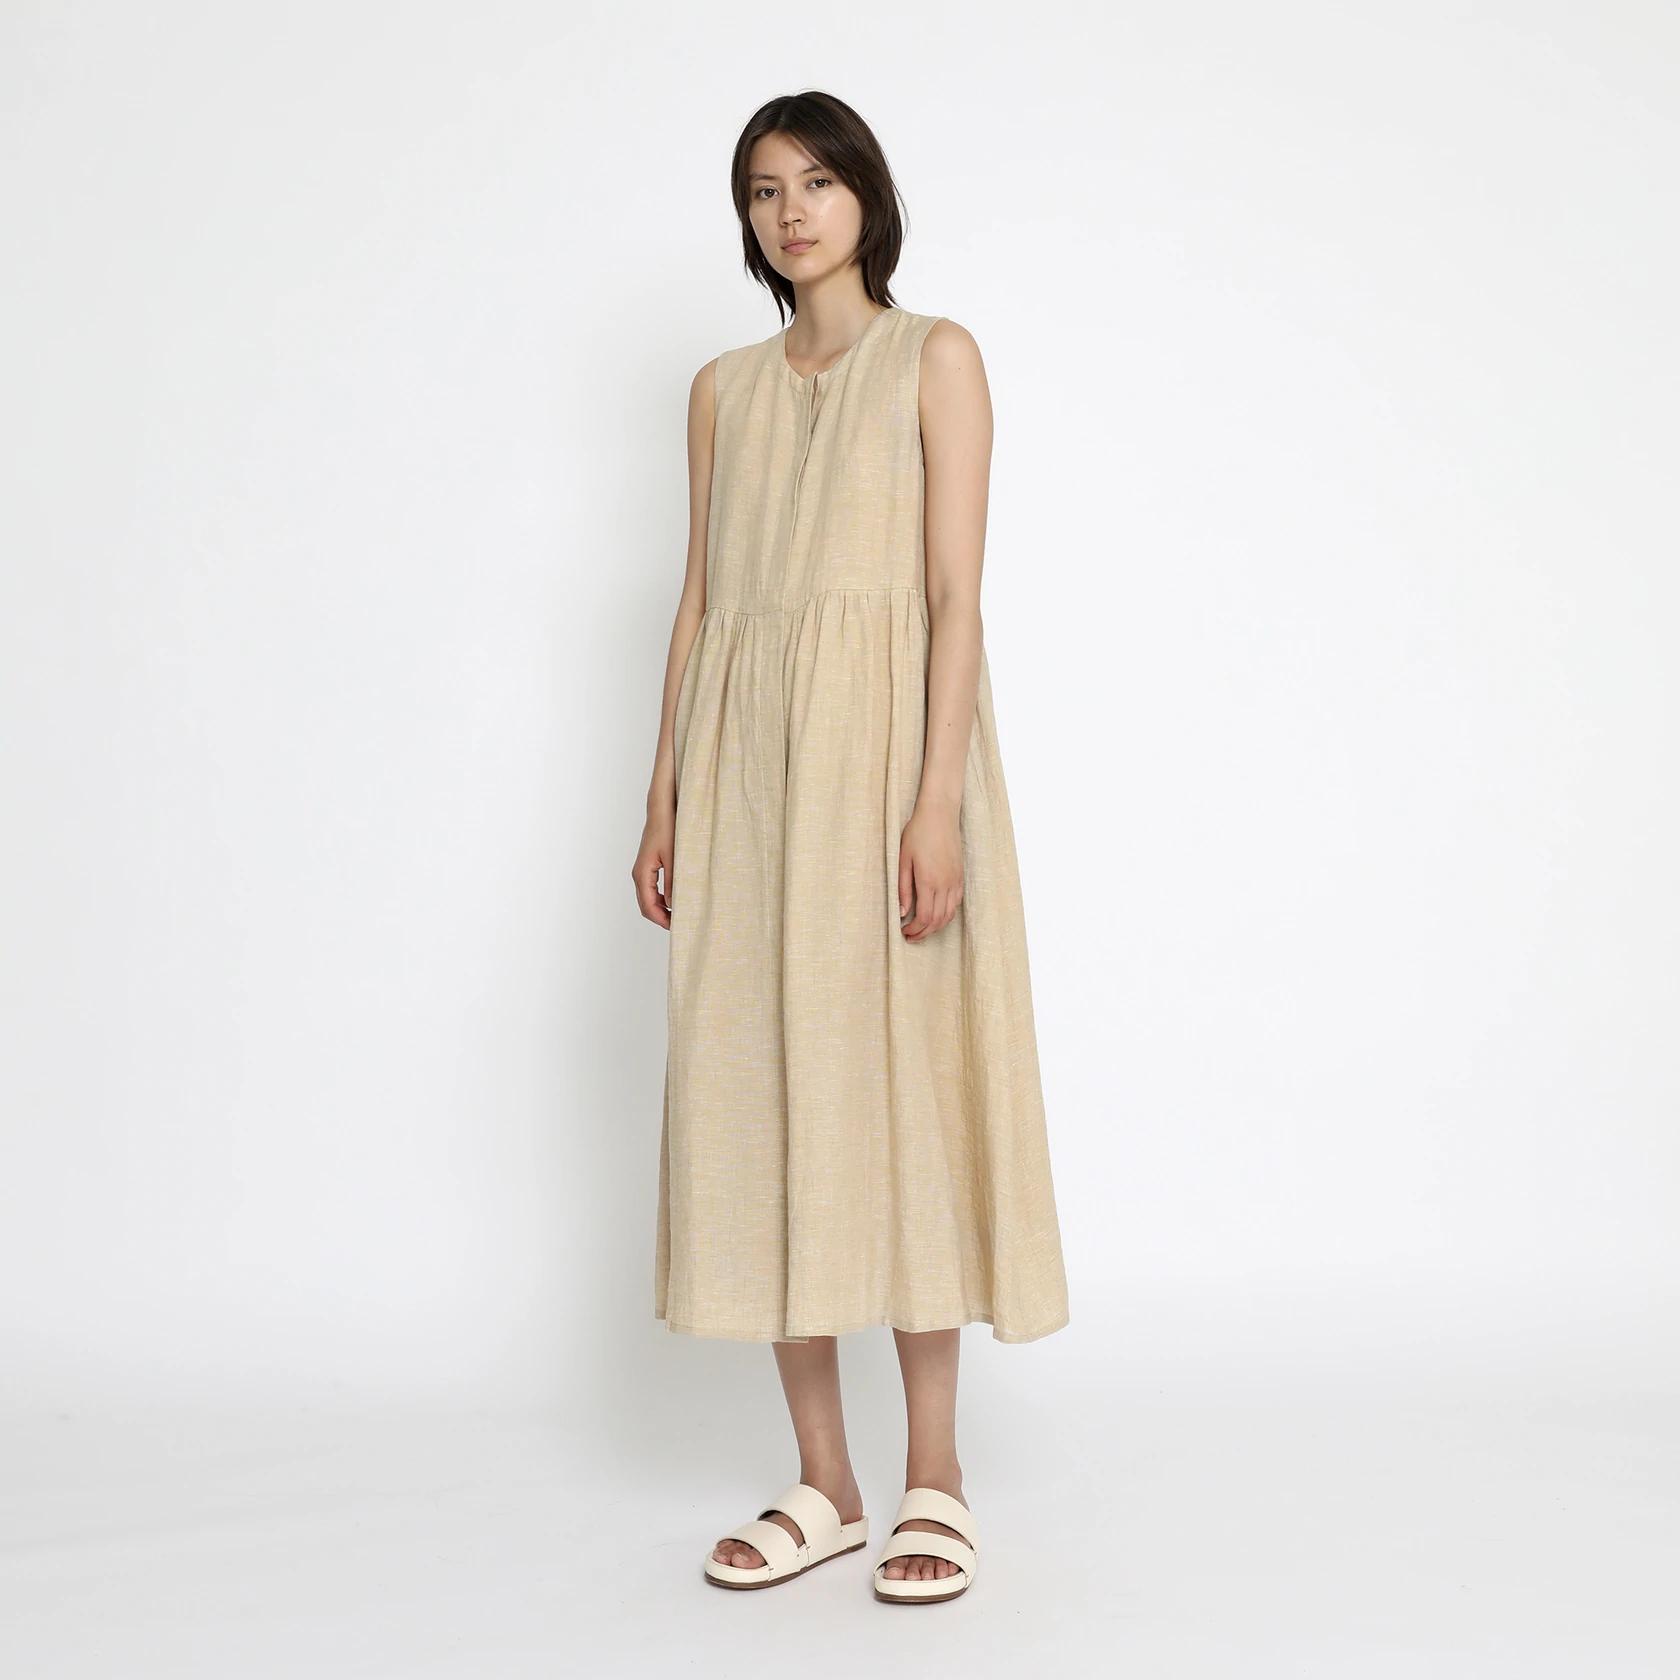 Product Image for Linen Summer Play Dress, Mustard Noise